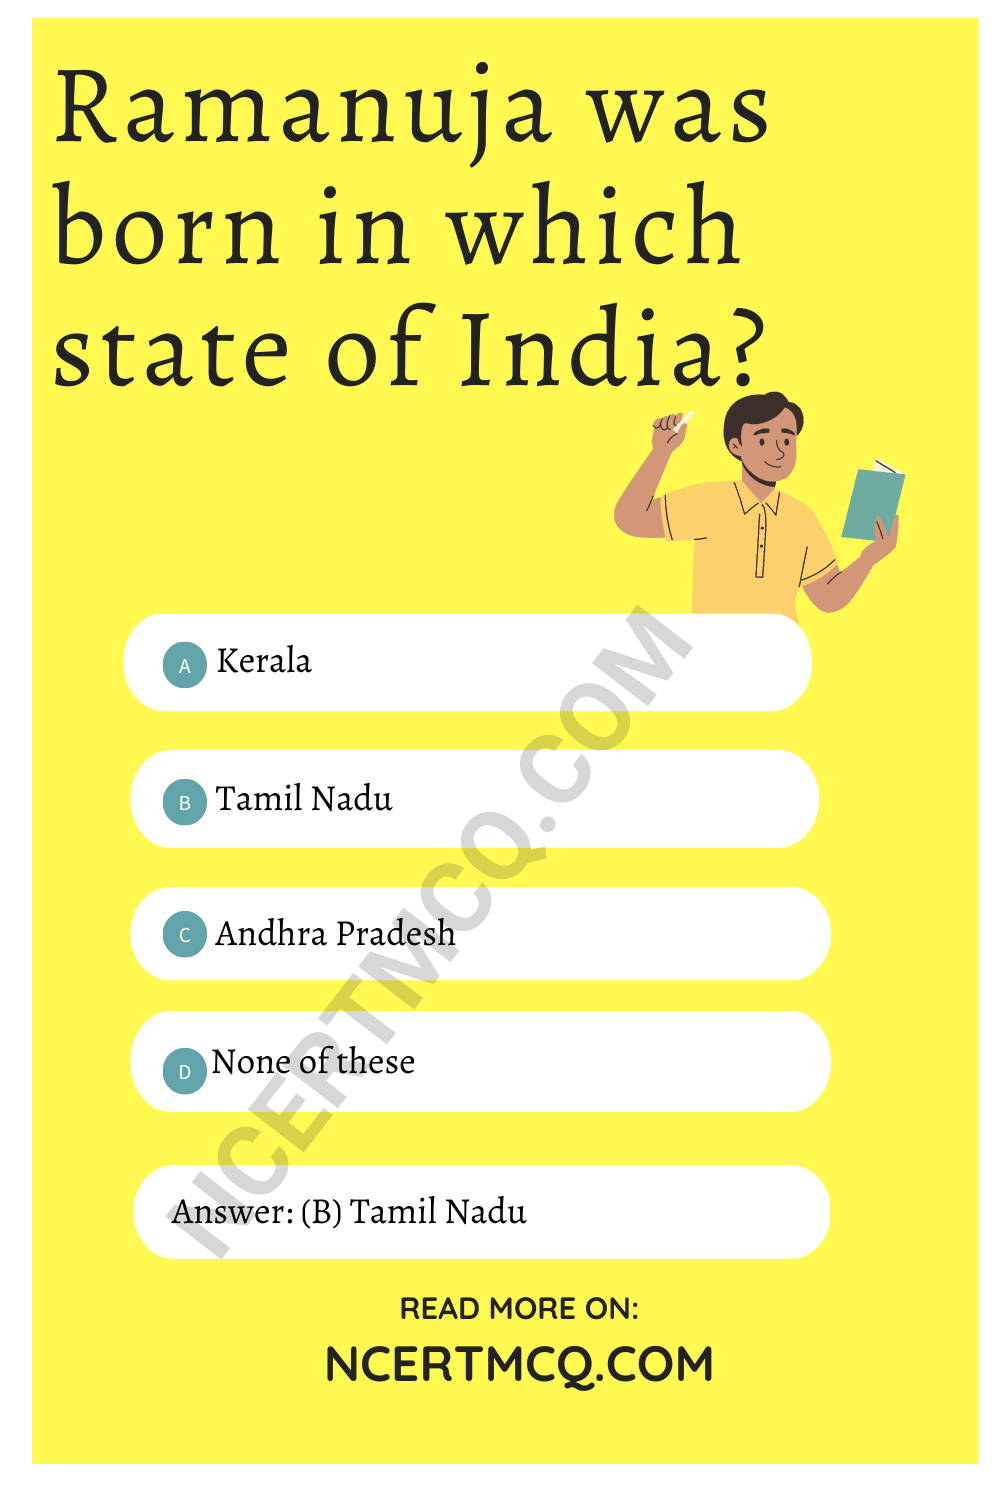 Ramanuja was born in which state of India?